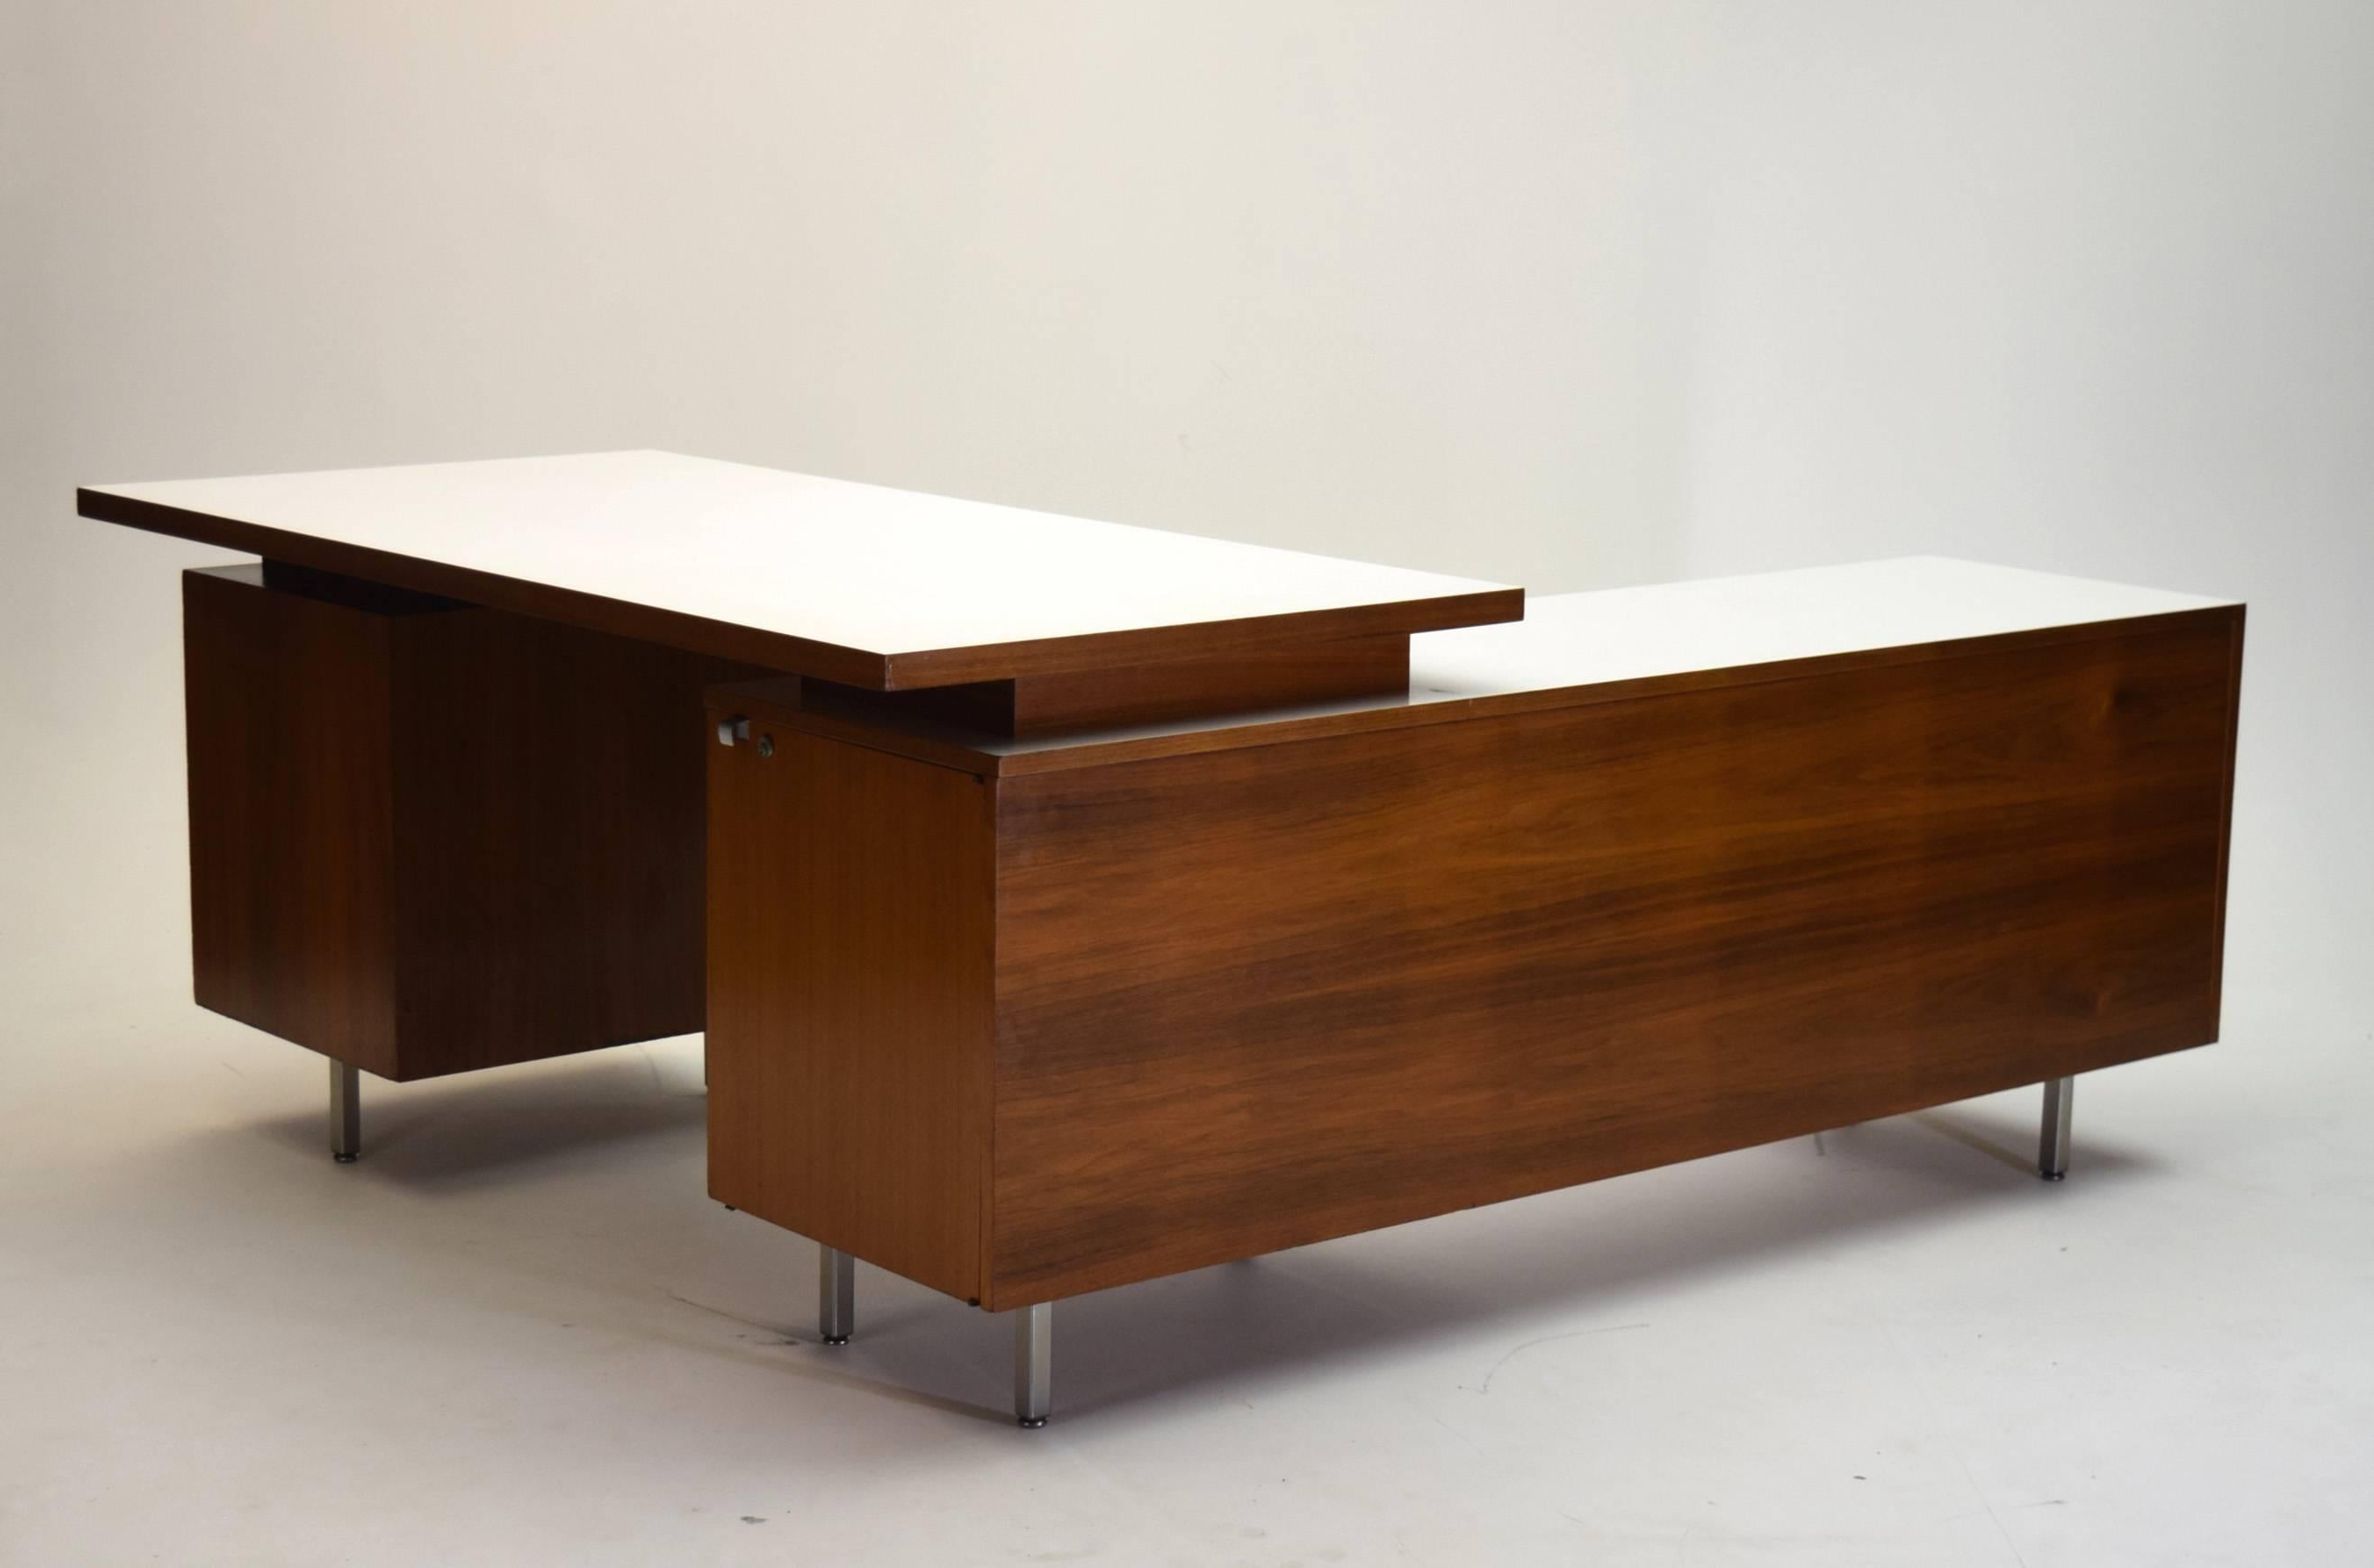 Herman Miller desk designed by George Nelson was custom ordered and produced for a bank executive circa 1960 in black American walnut and the design is featured in the 1954 issued Knoll catalog. Featuring a unique top that rather than being entirely